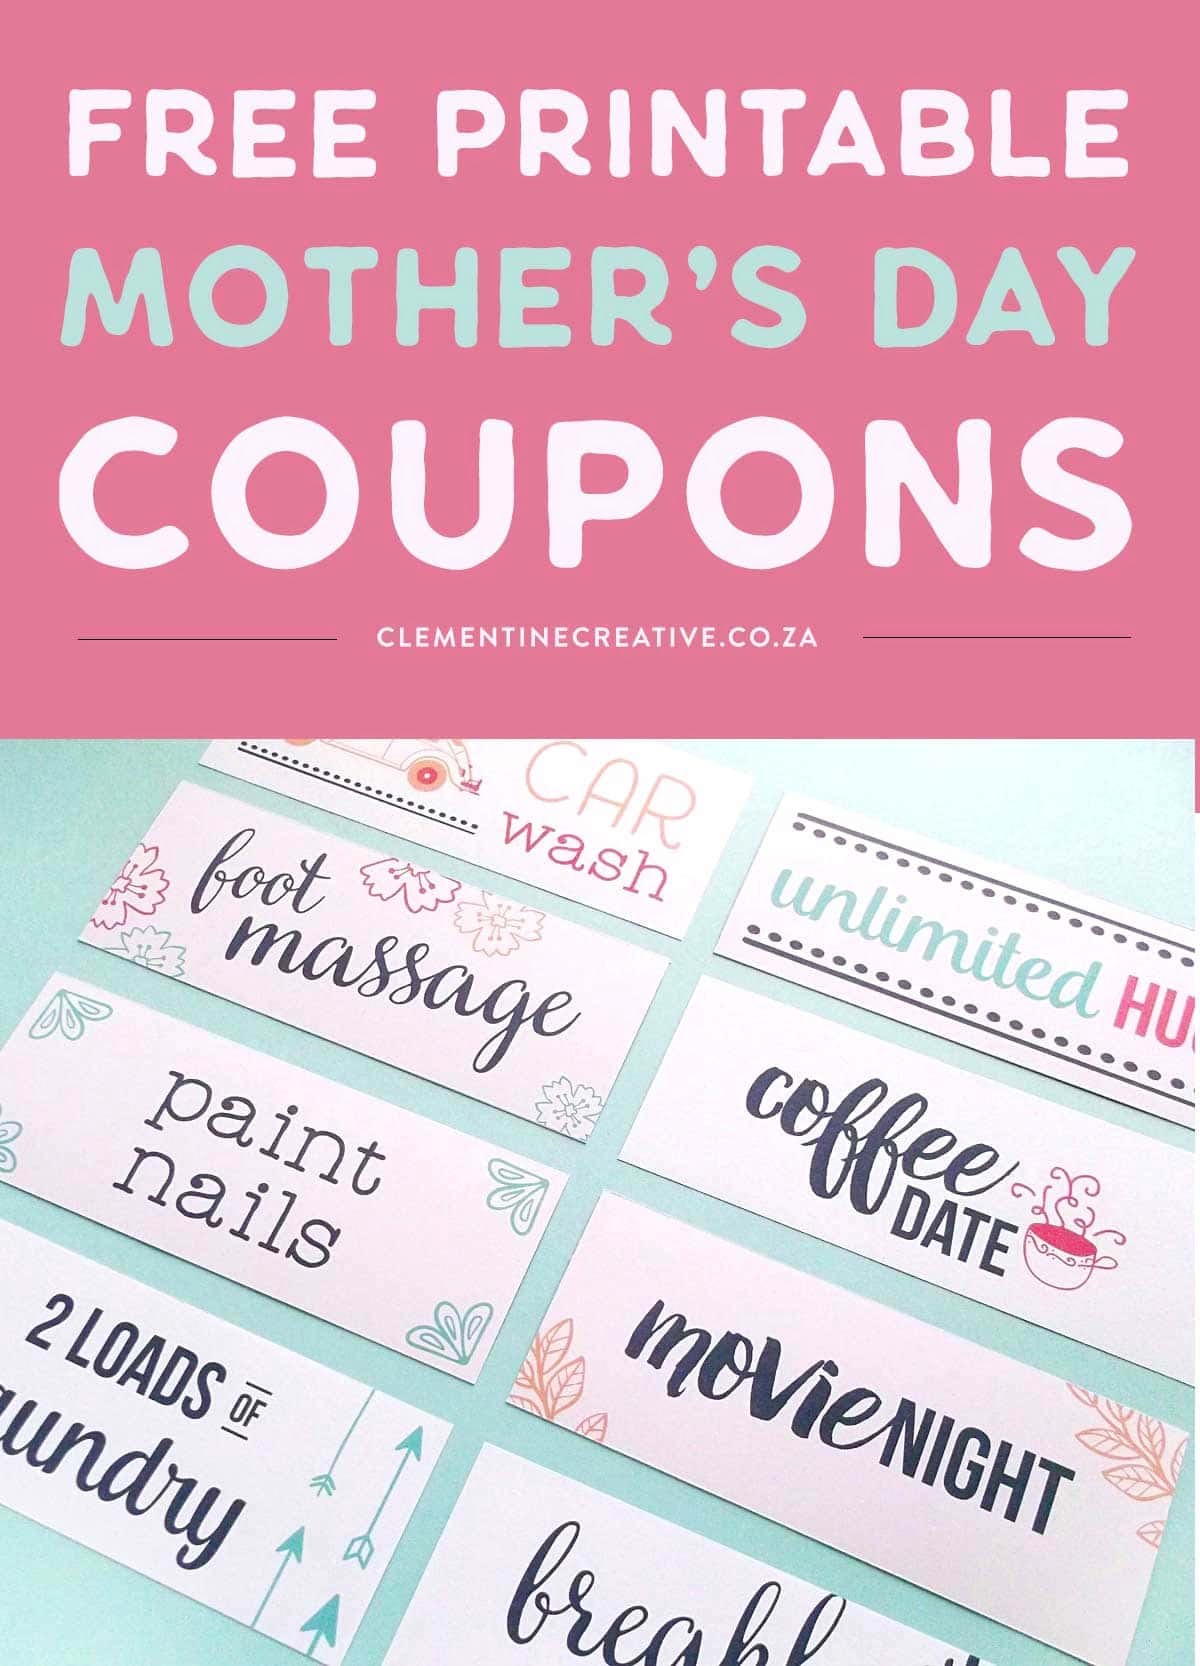 Free Printable Mother s Day Coupons To Make Mom s Day